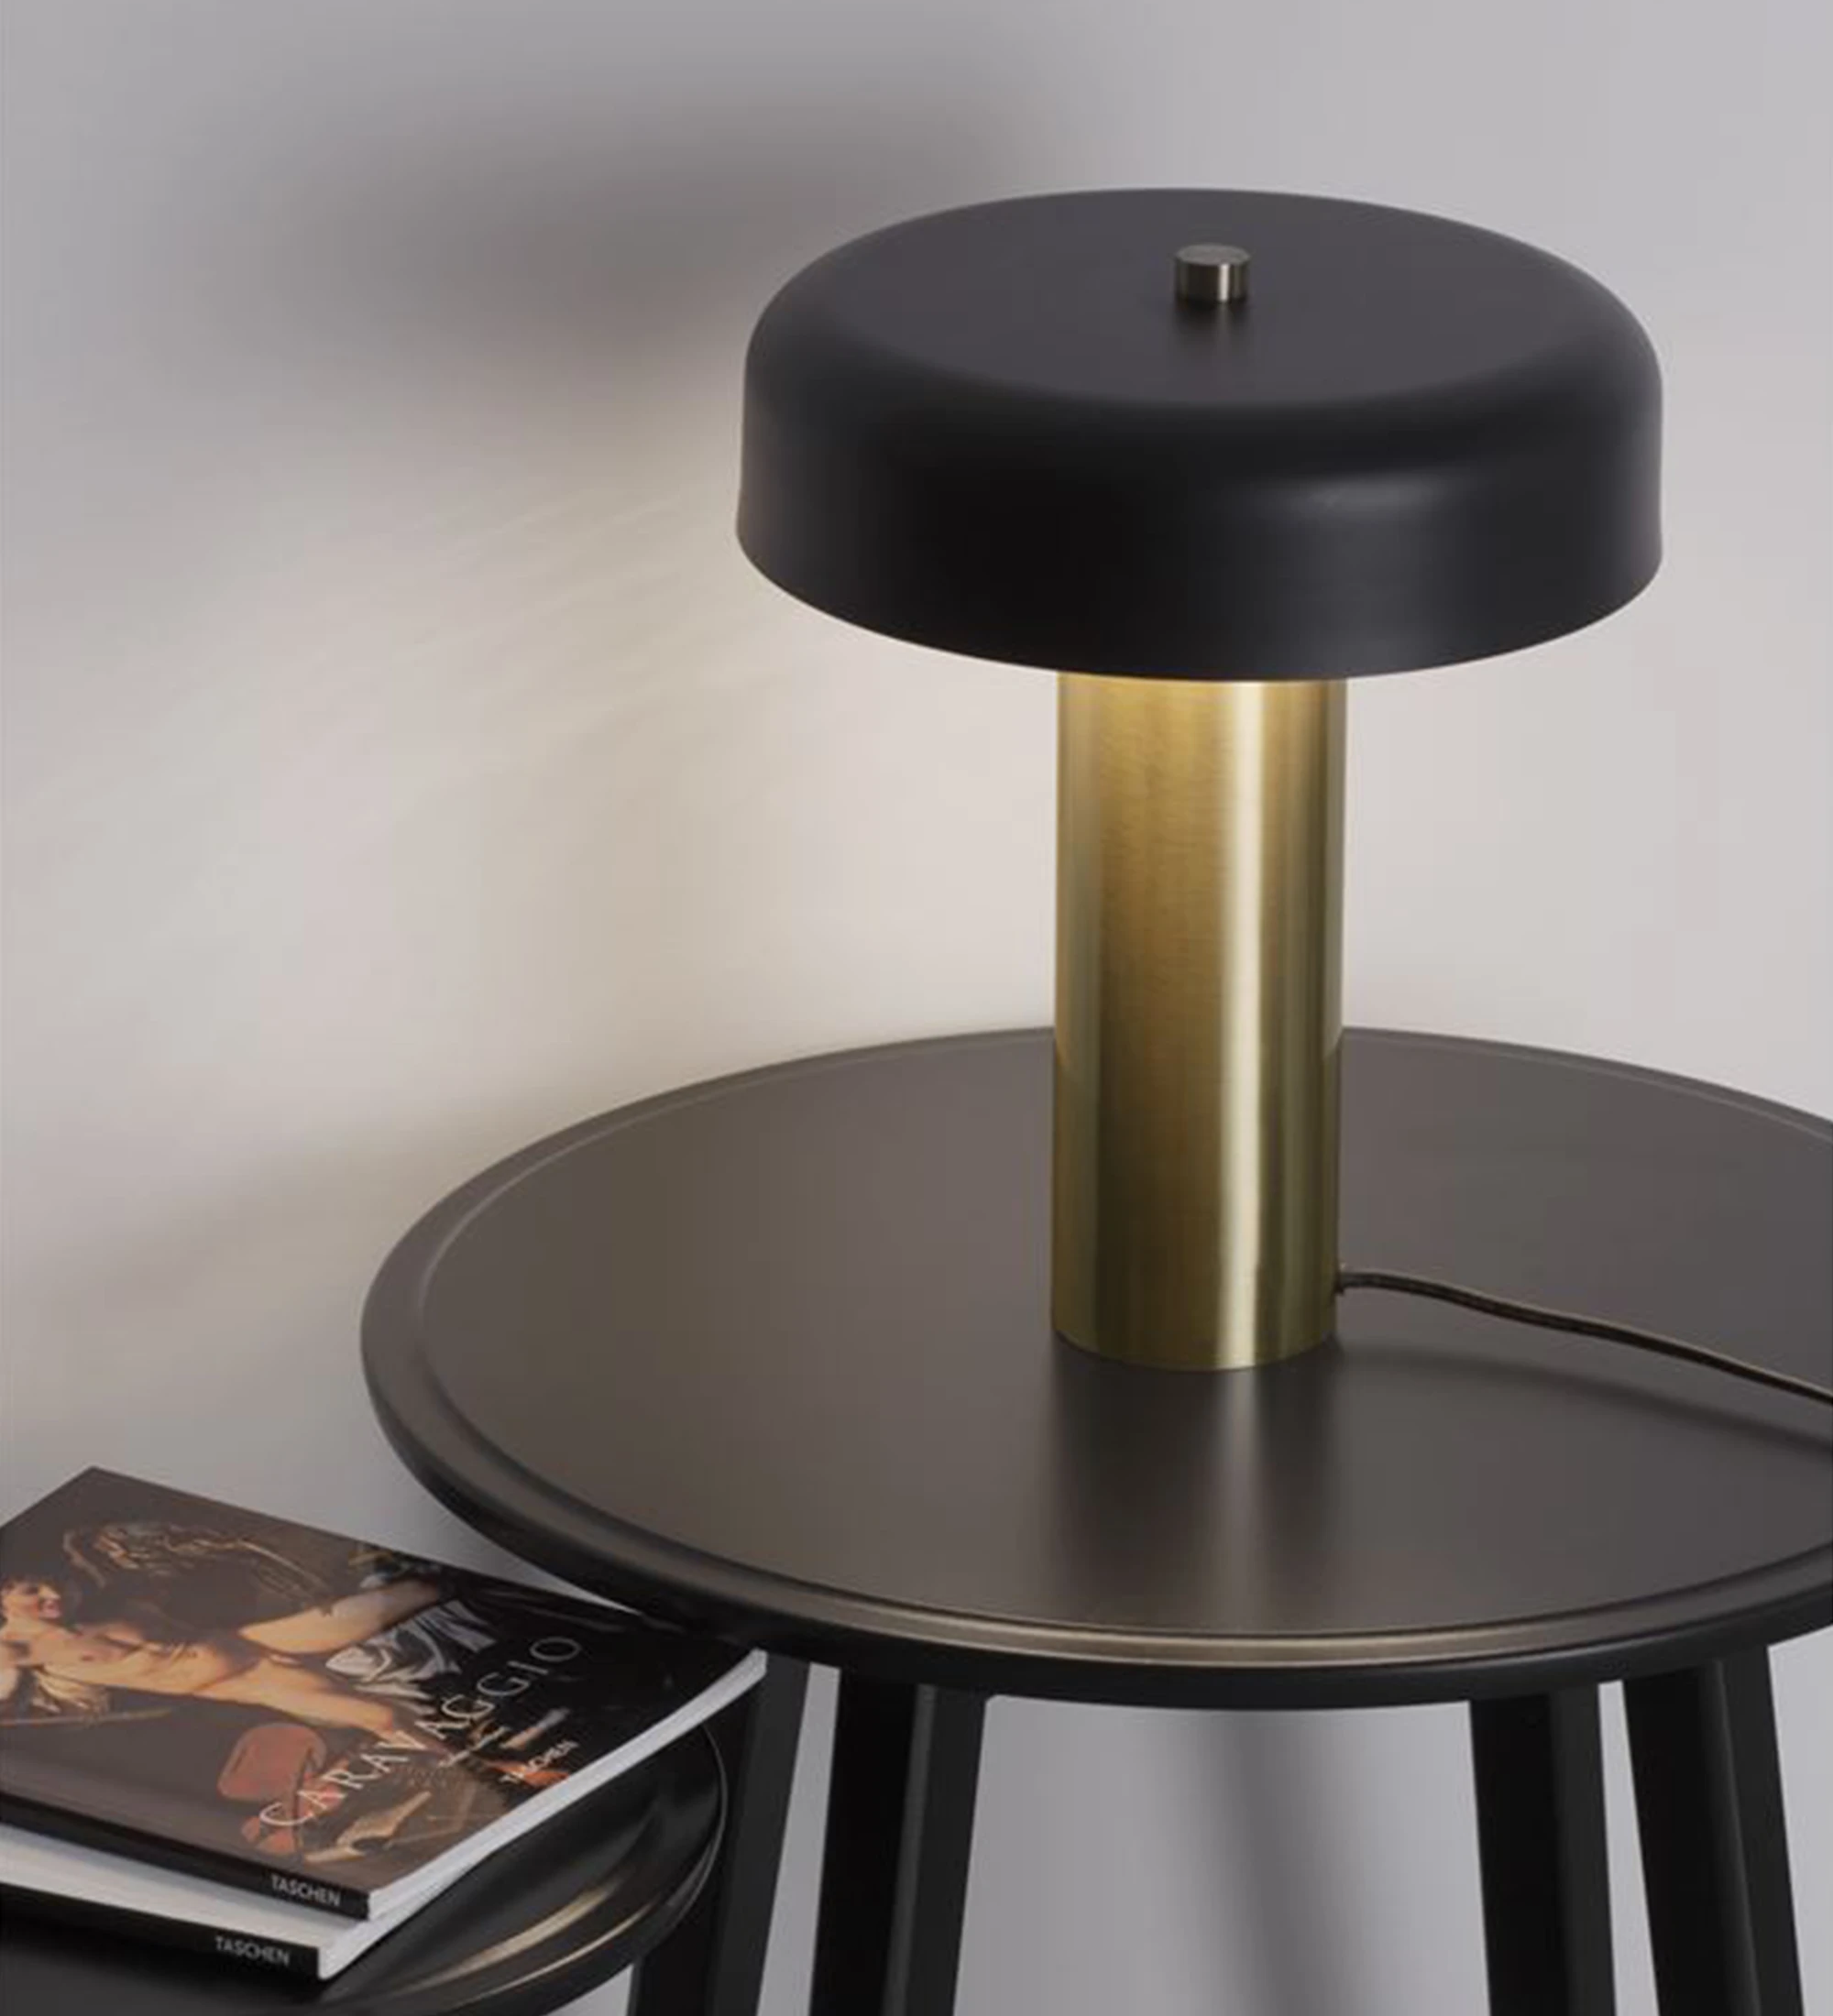 Table lamp in gold aluminum and shade in black aluminum.